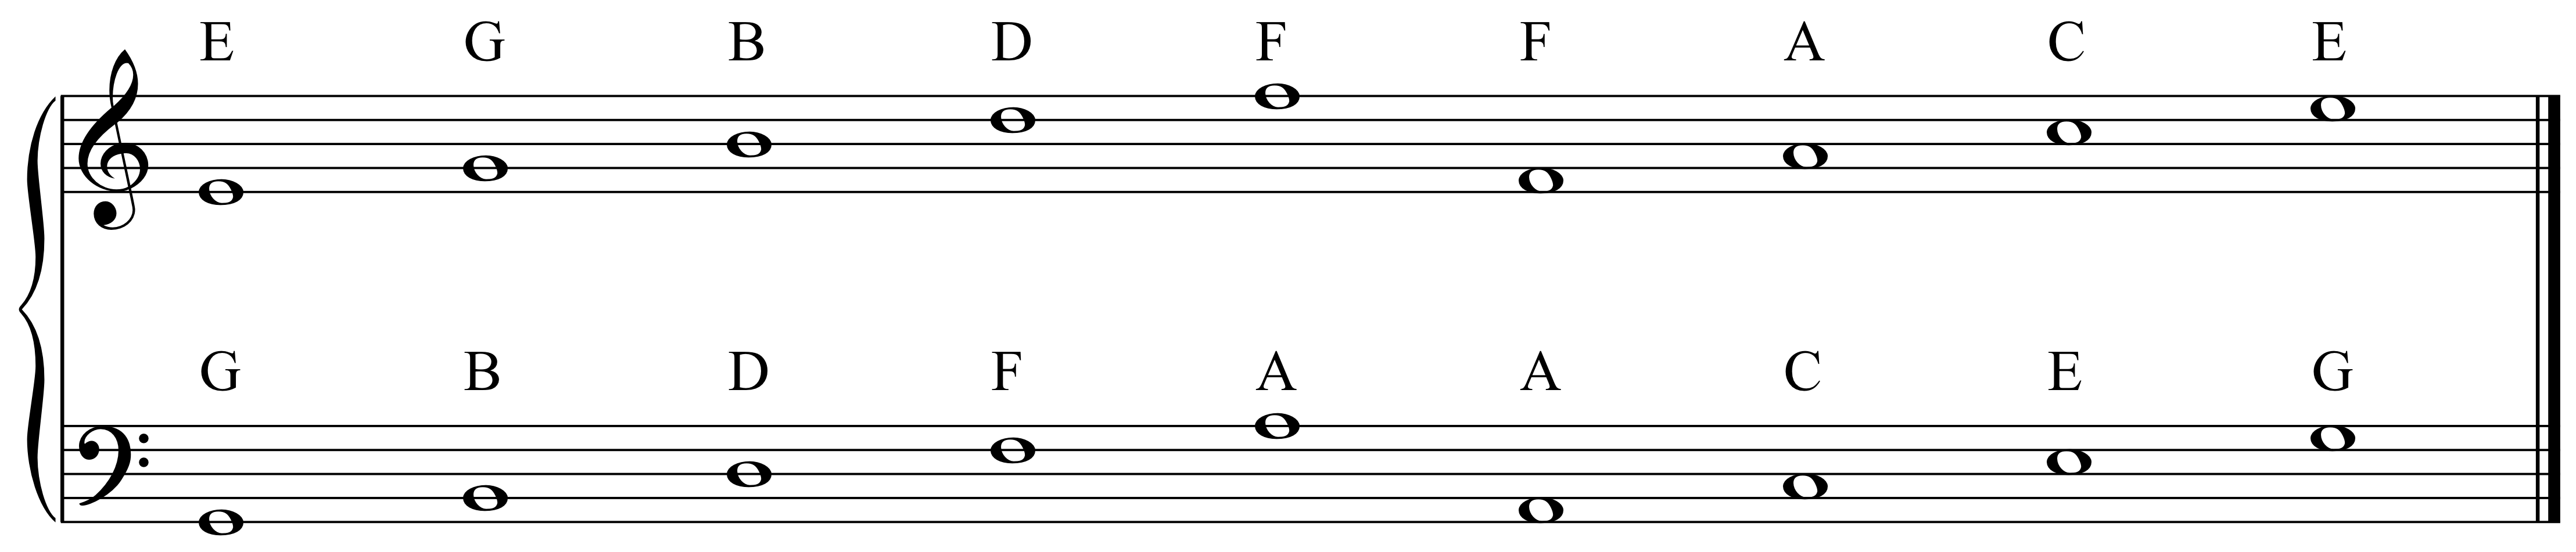 Music Notes And Their Letters